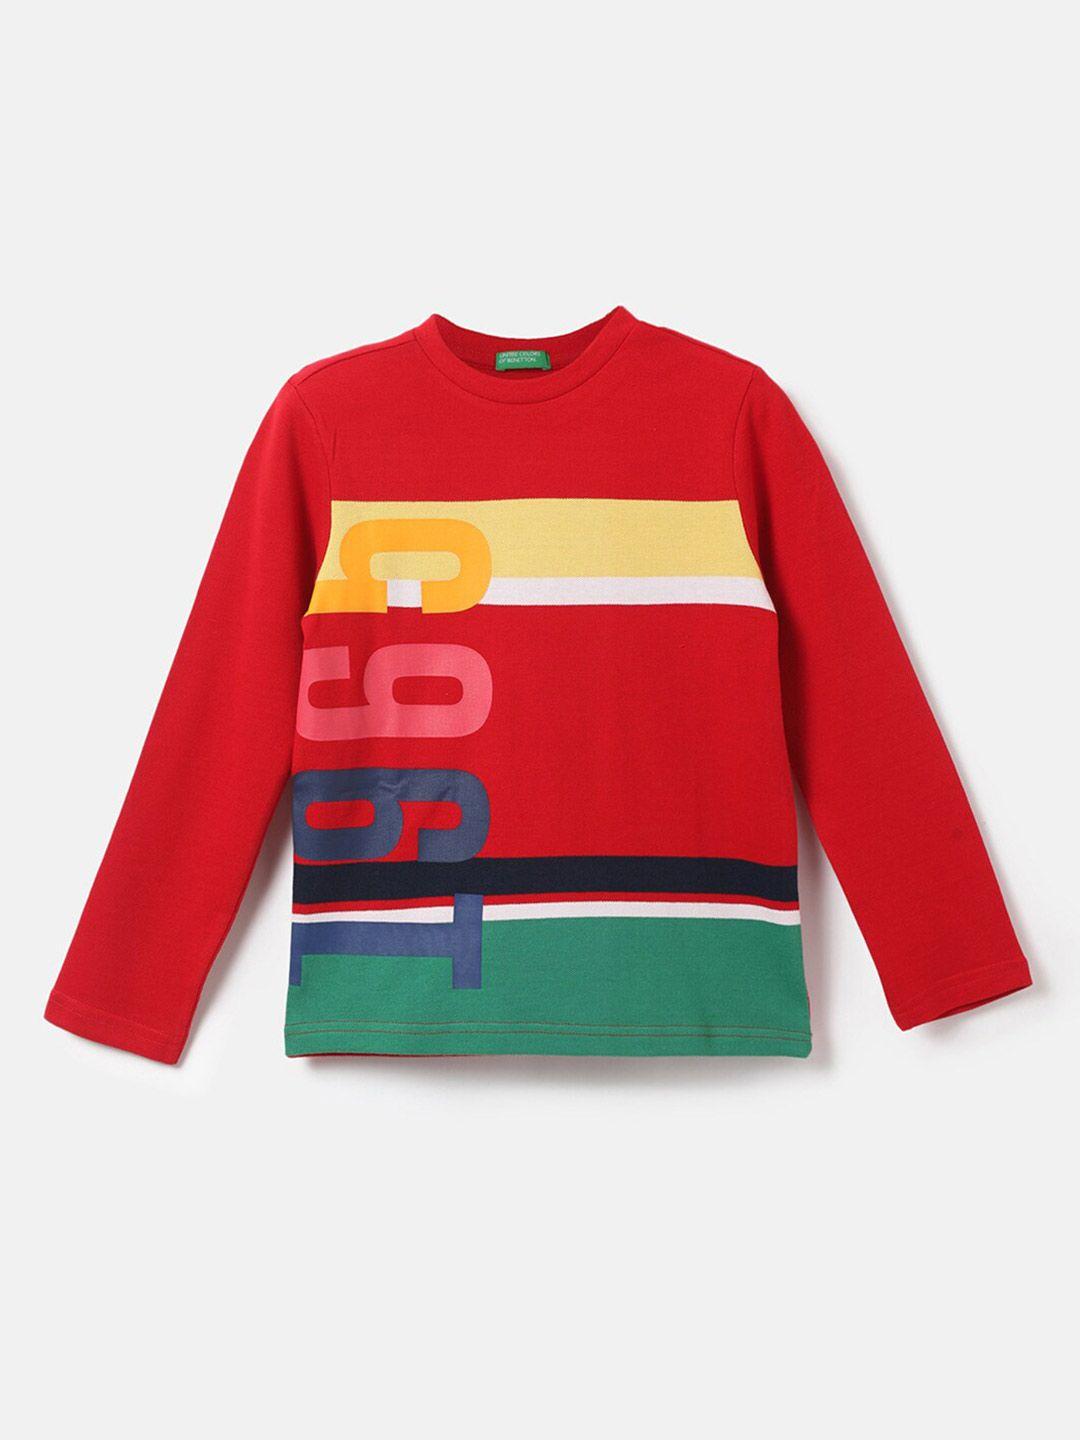 united colors of benetton boys red & yellow colourblocked t-shirt